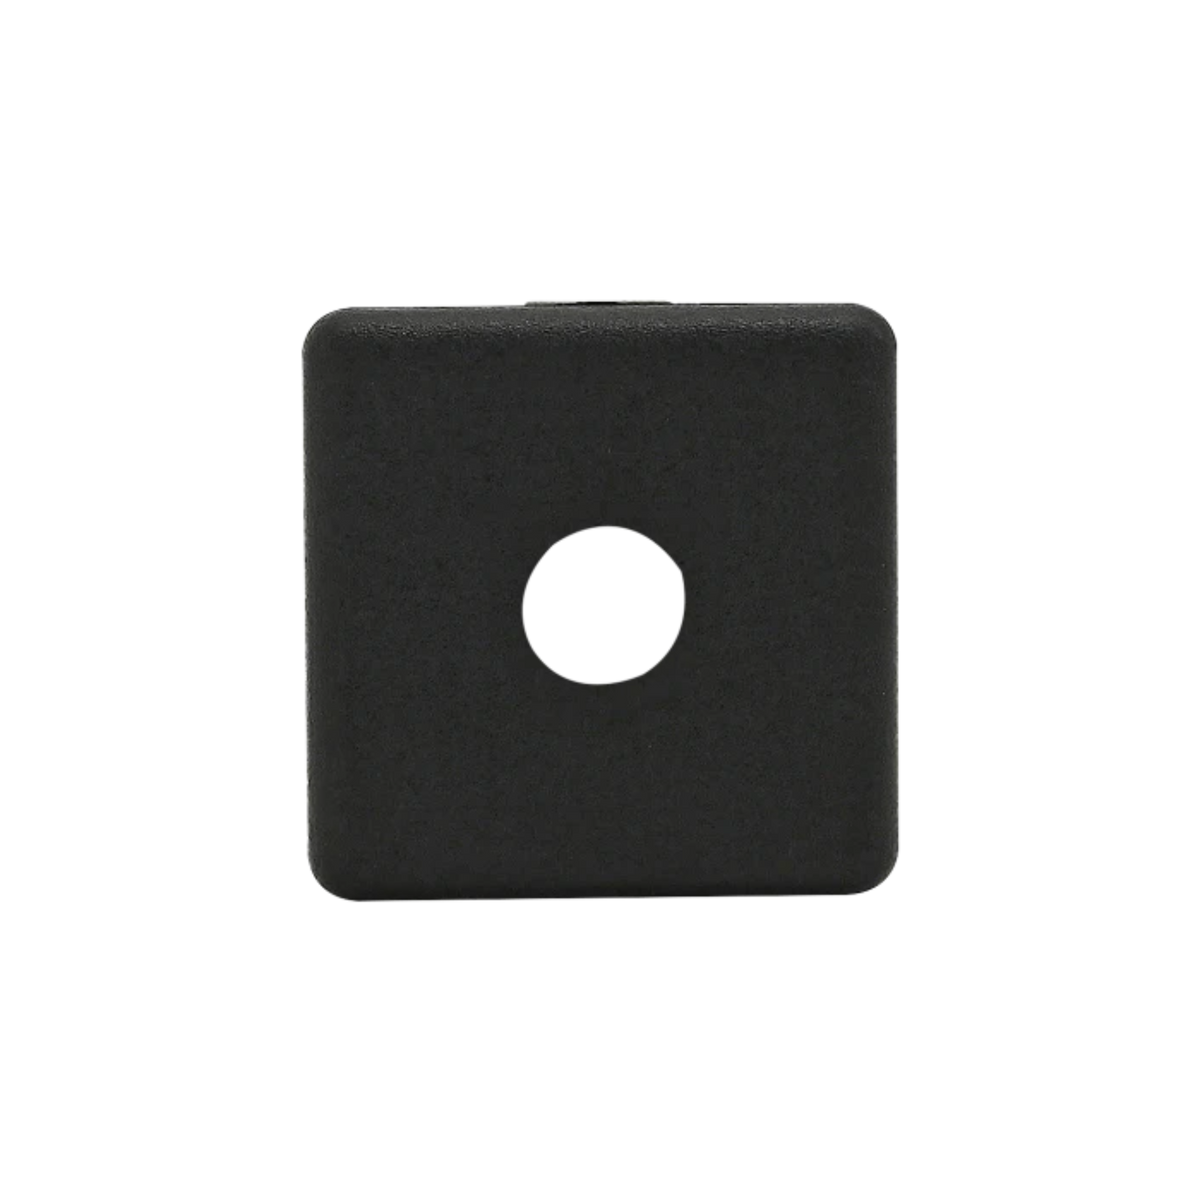 black square with a hole in the center